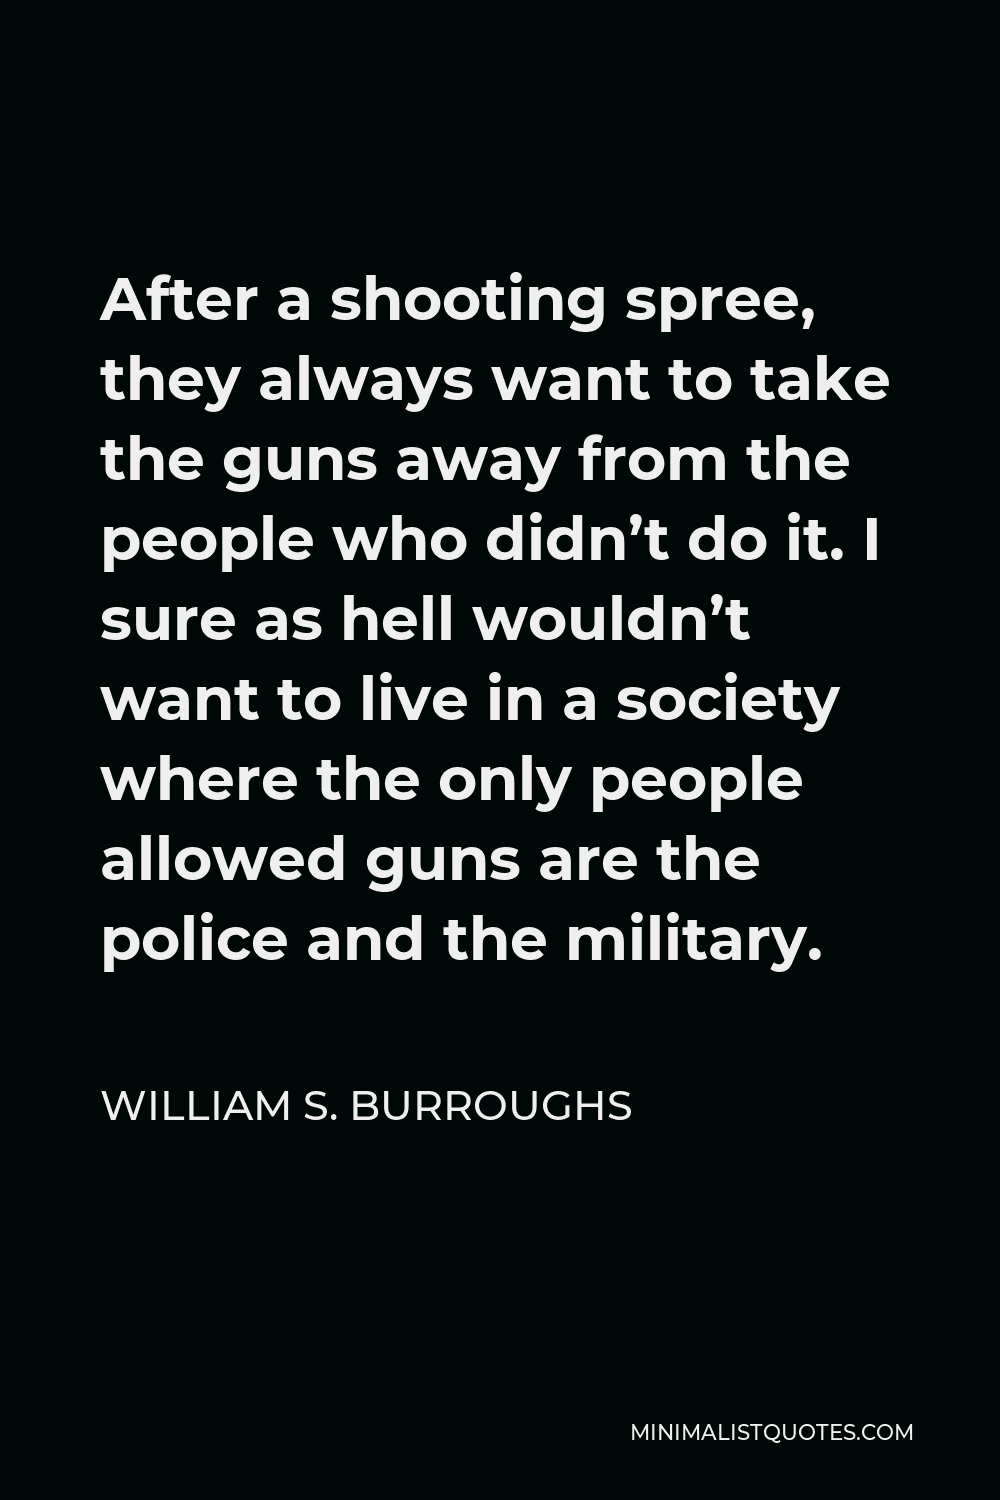 William S. Burroughs Quote - After a shooting spree, they always want to take the guns away from the people who didn’t do it. I sure as hell wouldn’t want to live in a society where the only people allowed guns are the police and the military.